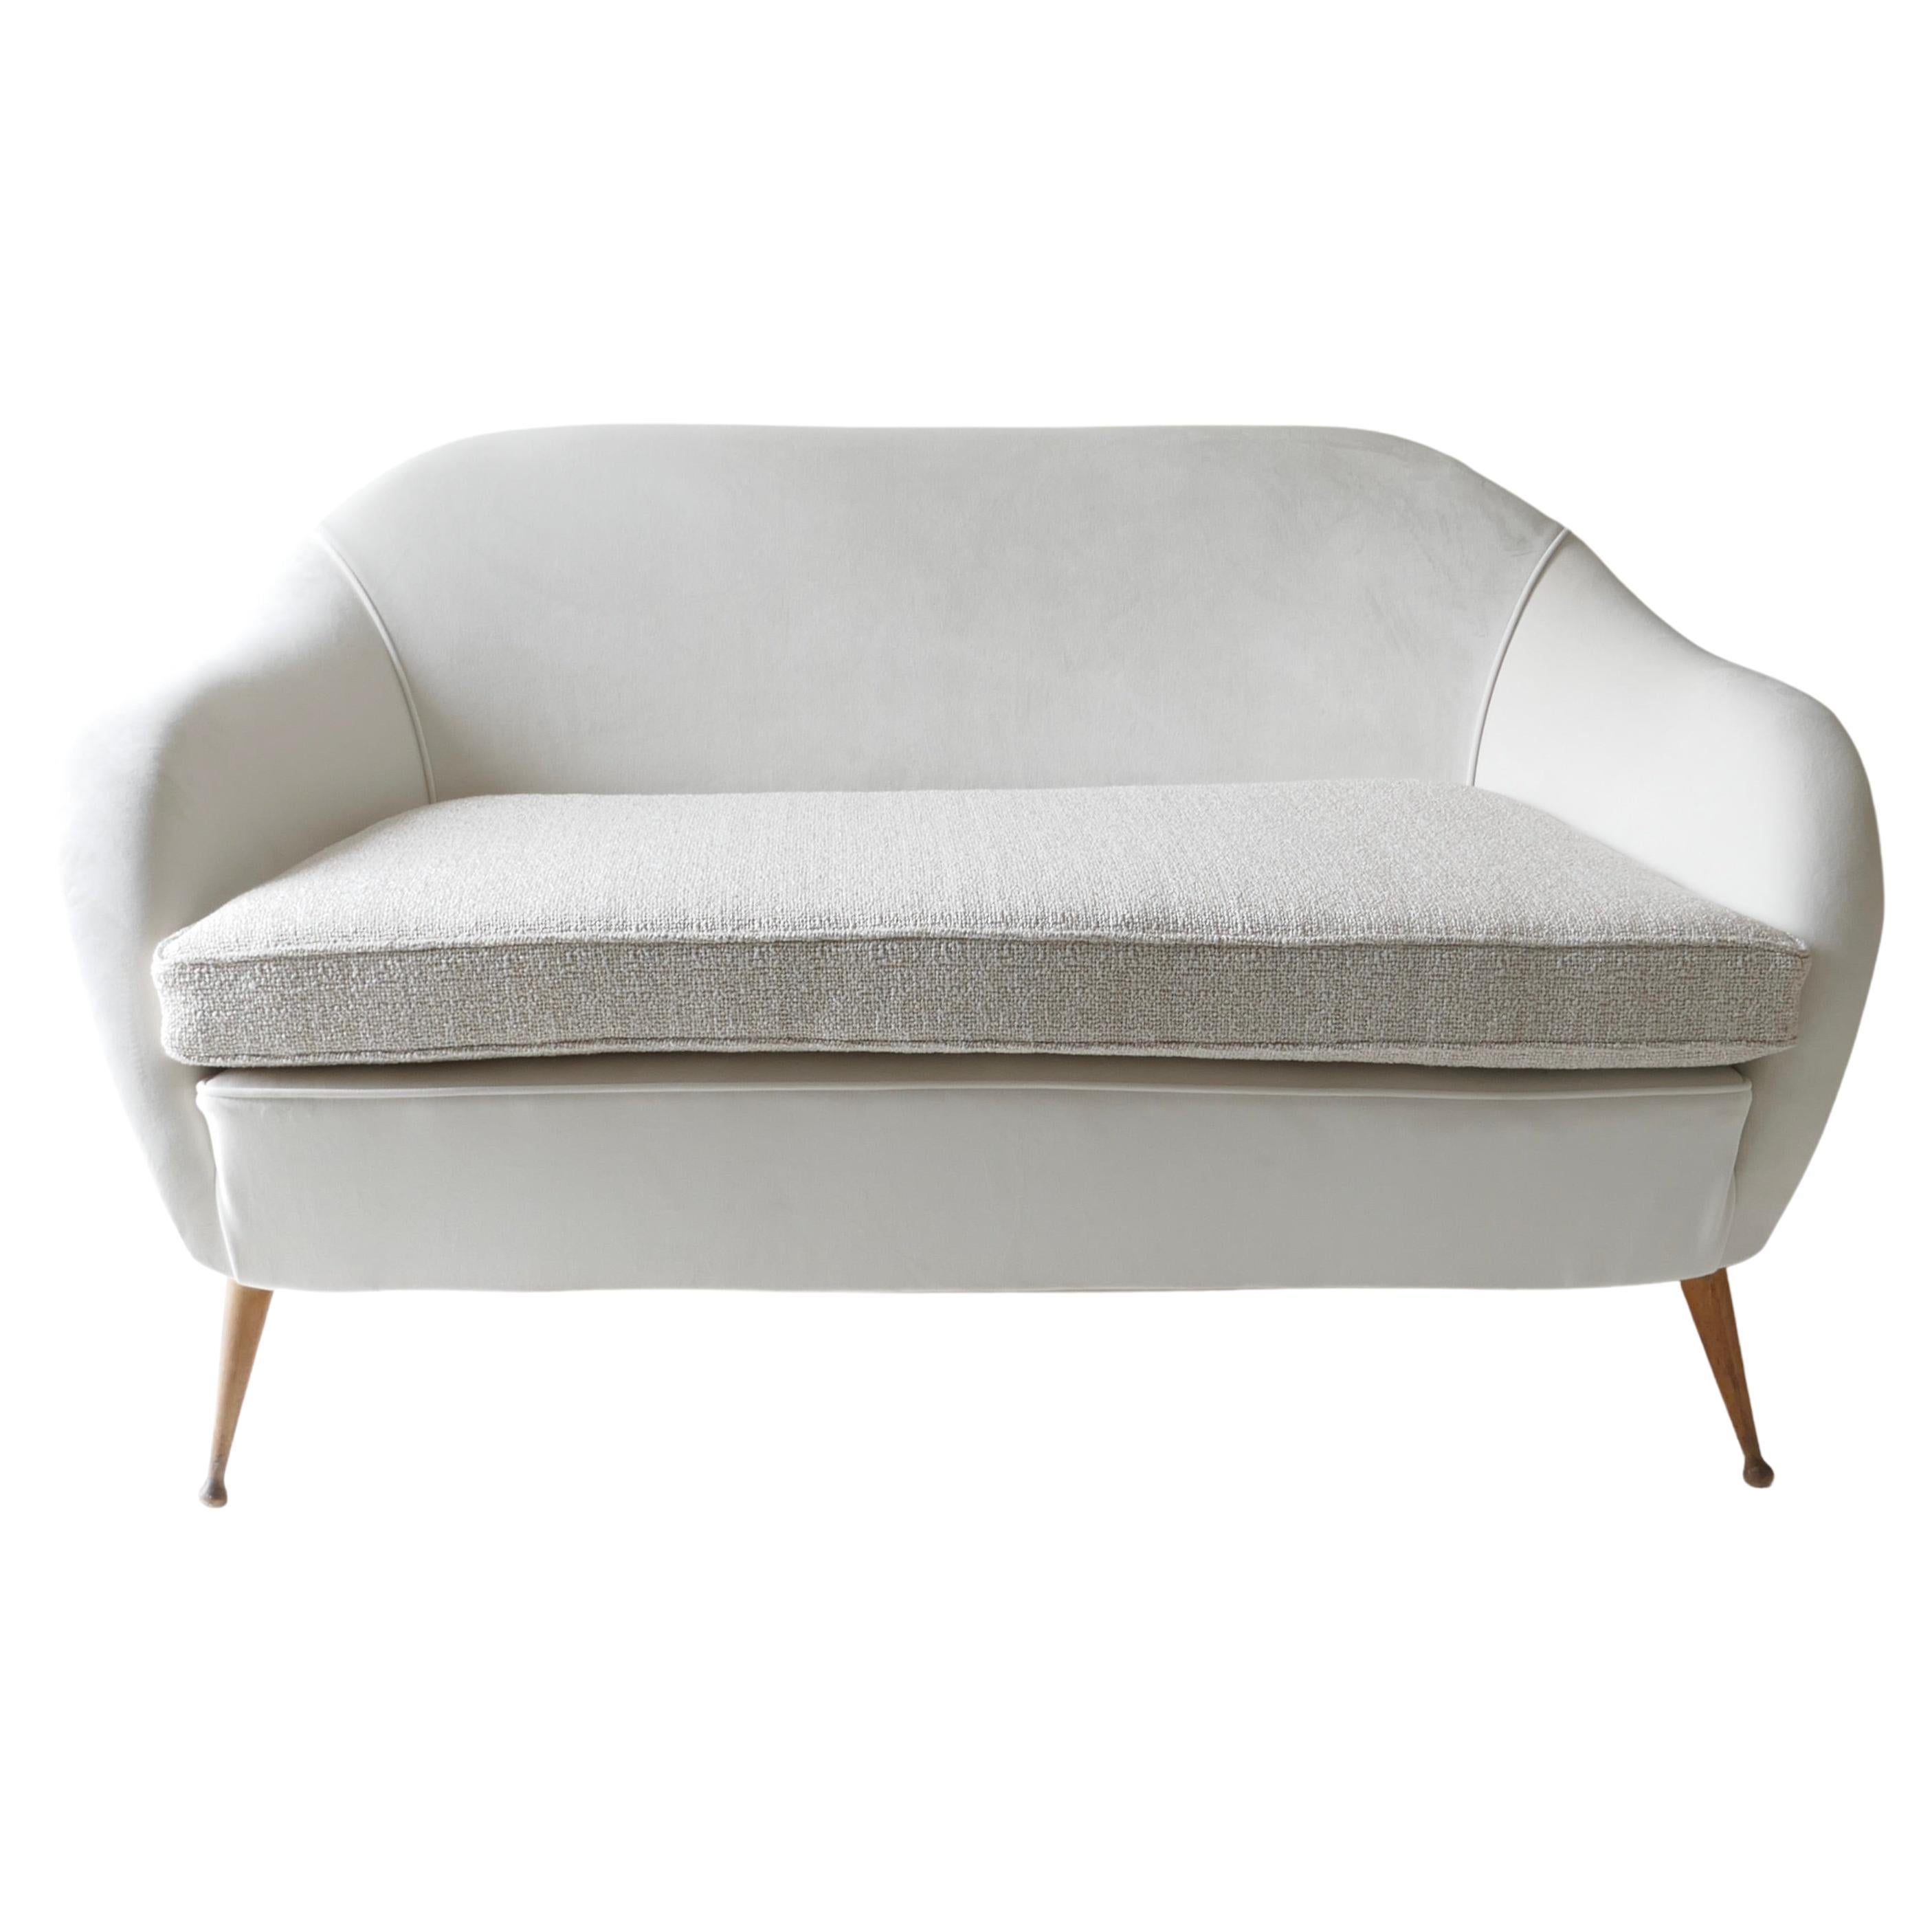 Italian 1950's 2 Seater Sofa, Reupholstered in White Velvet with Boucle Seat For Sale